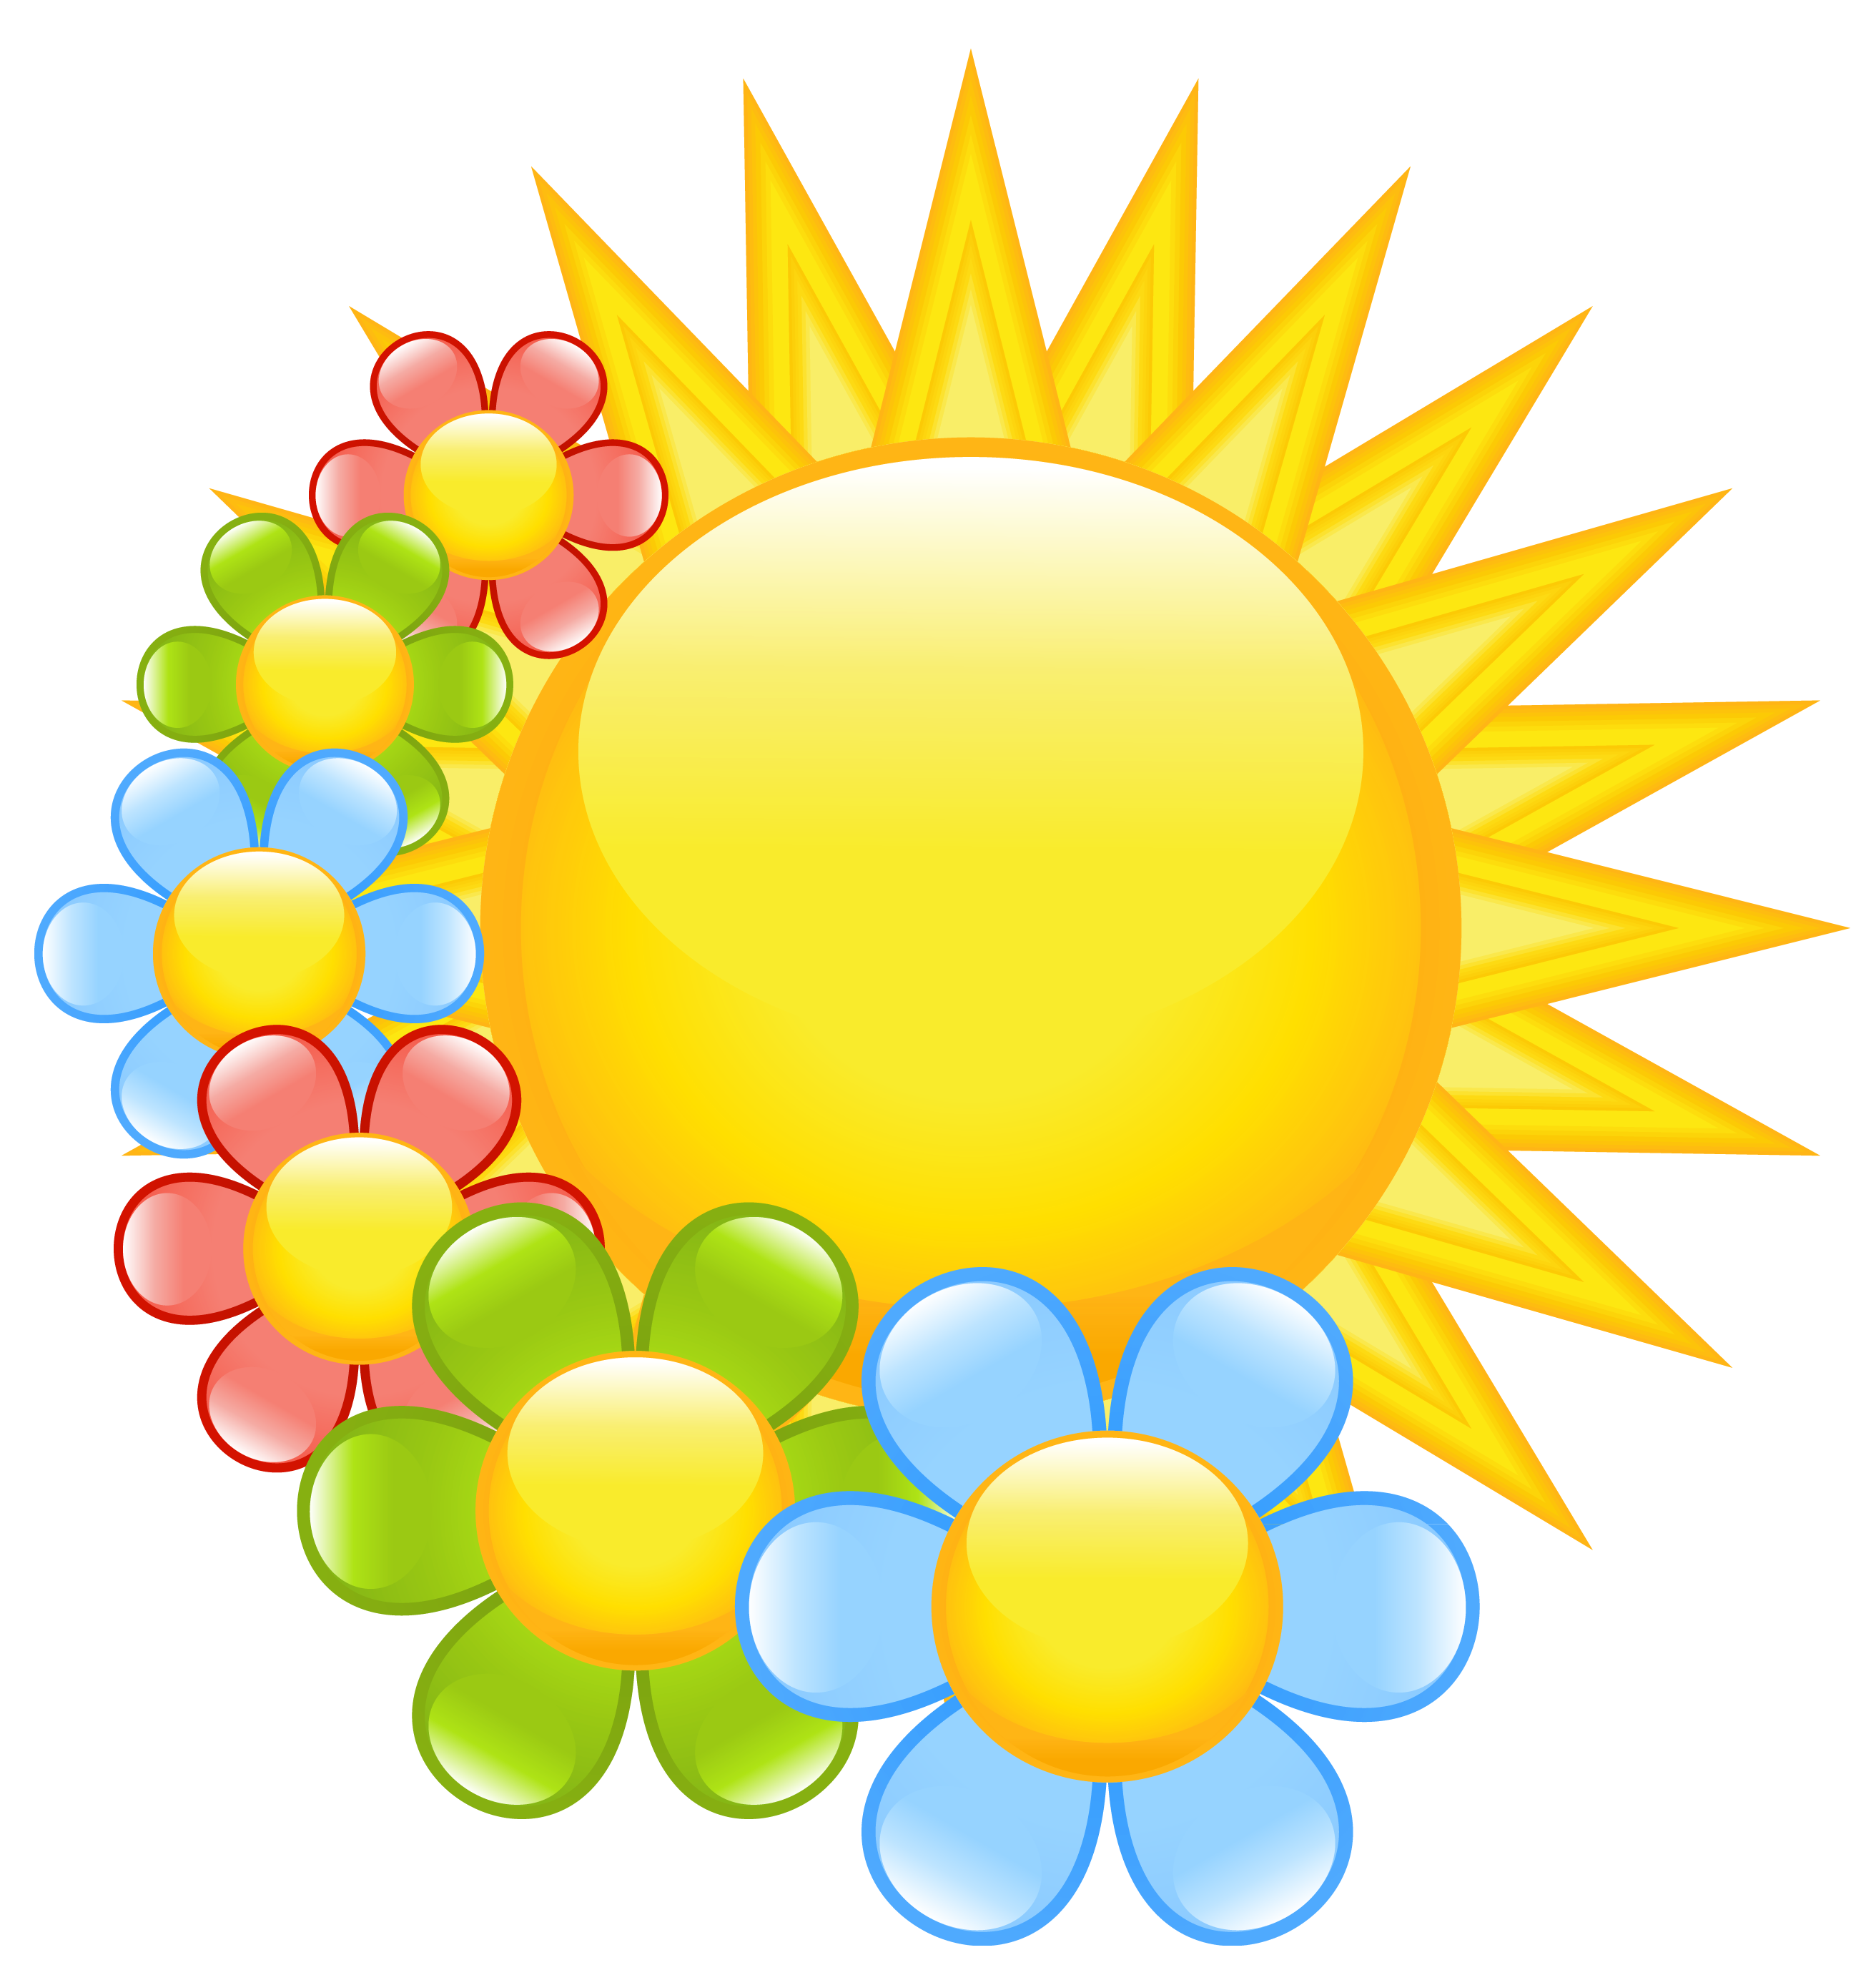 Spring flower spring sun with flowers clipart 0 image #7954